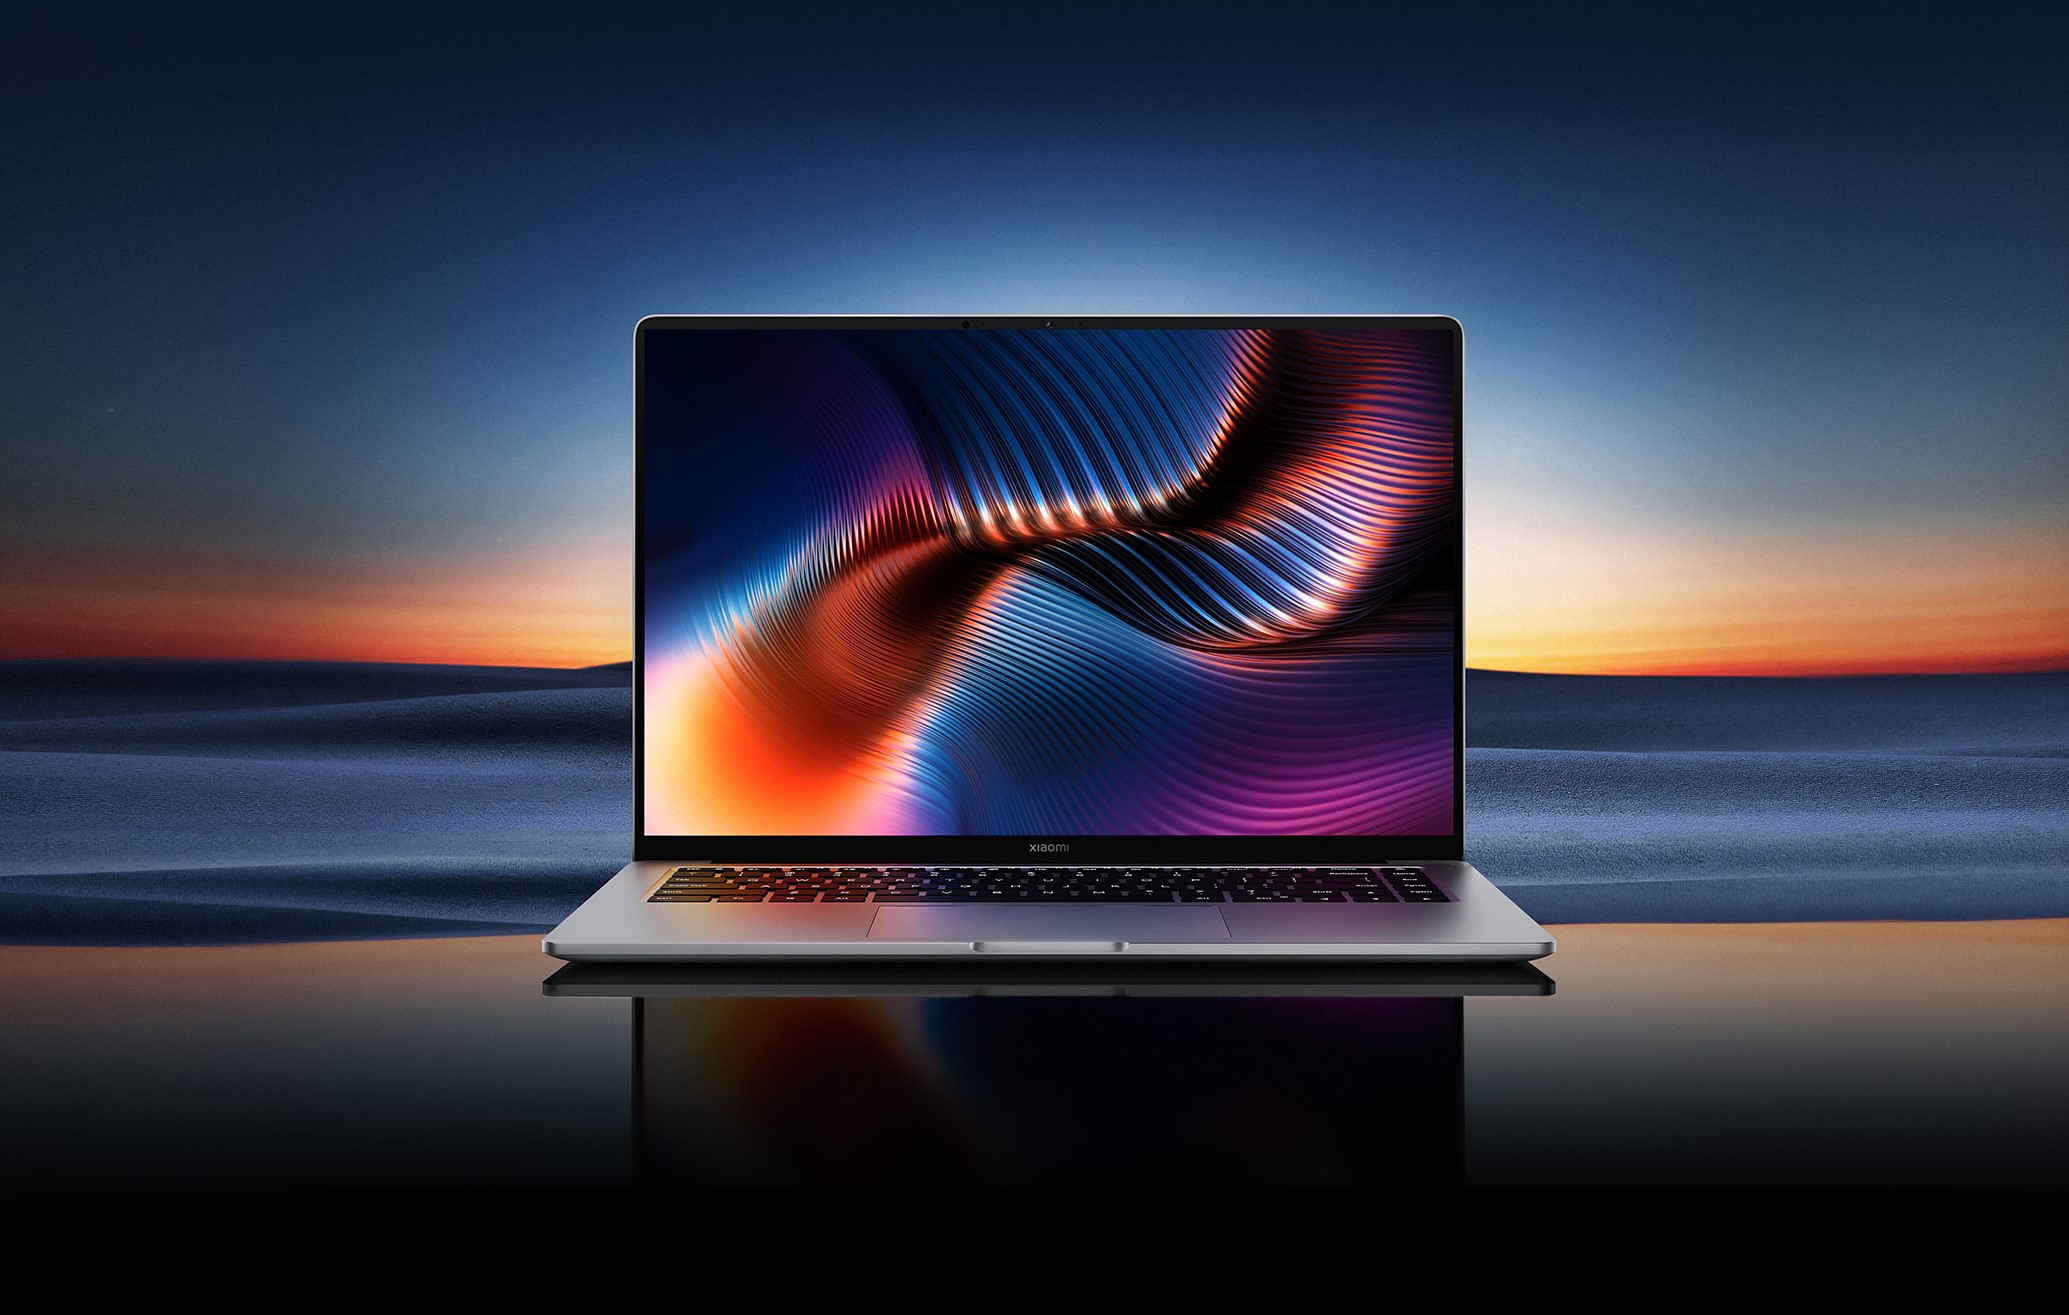 Official: Xiaomi will release Mi Notebook Pro X with Nvidia GeForce RTX 3050 Ti graphics card